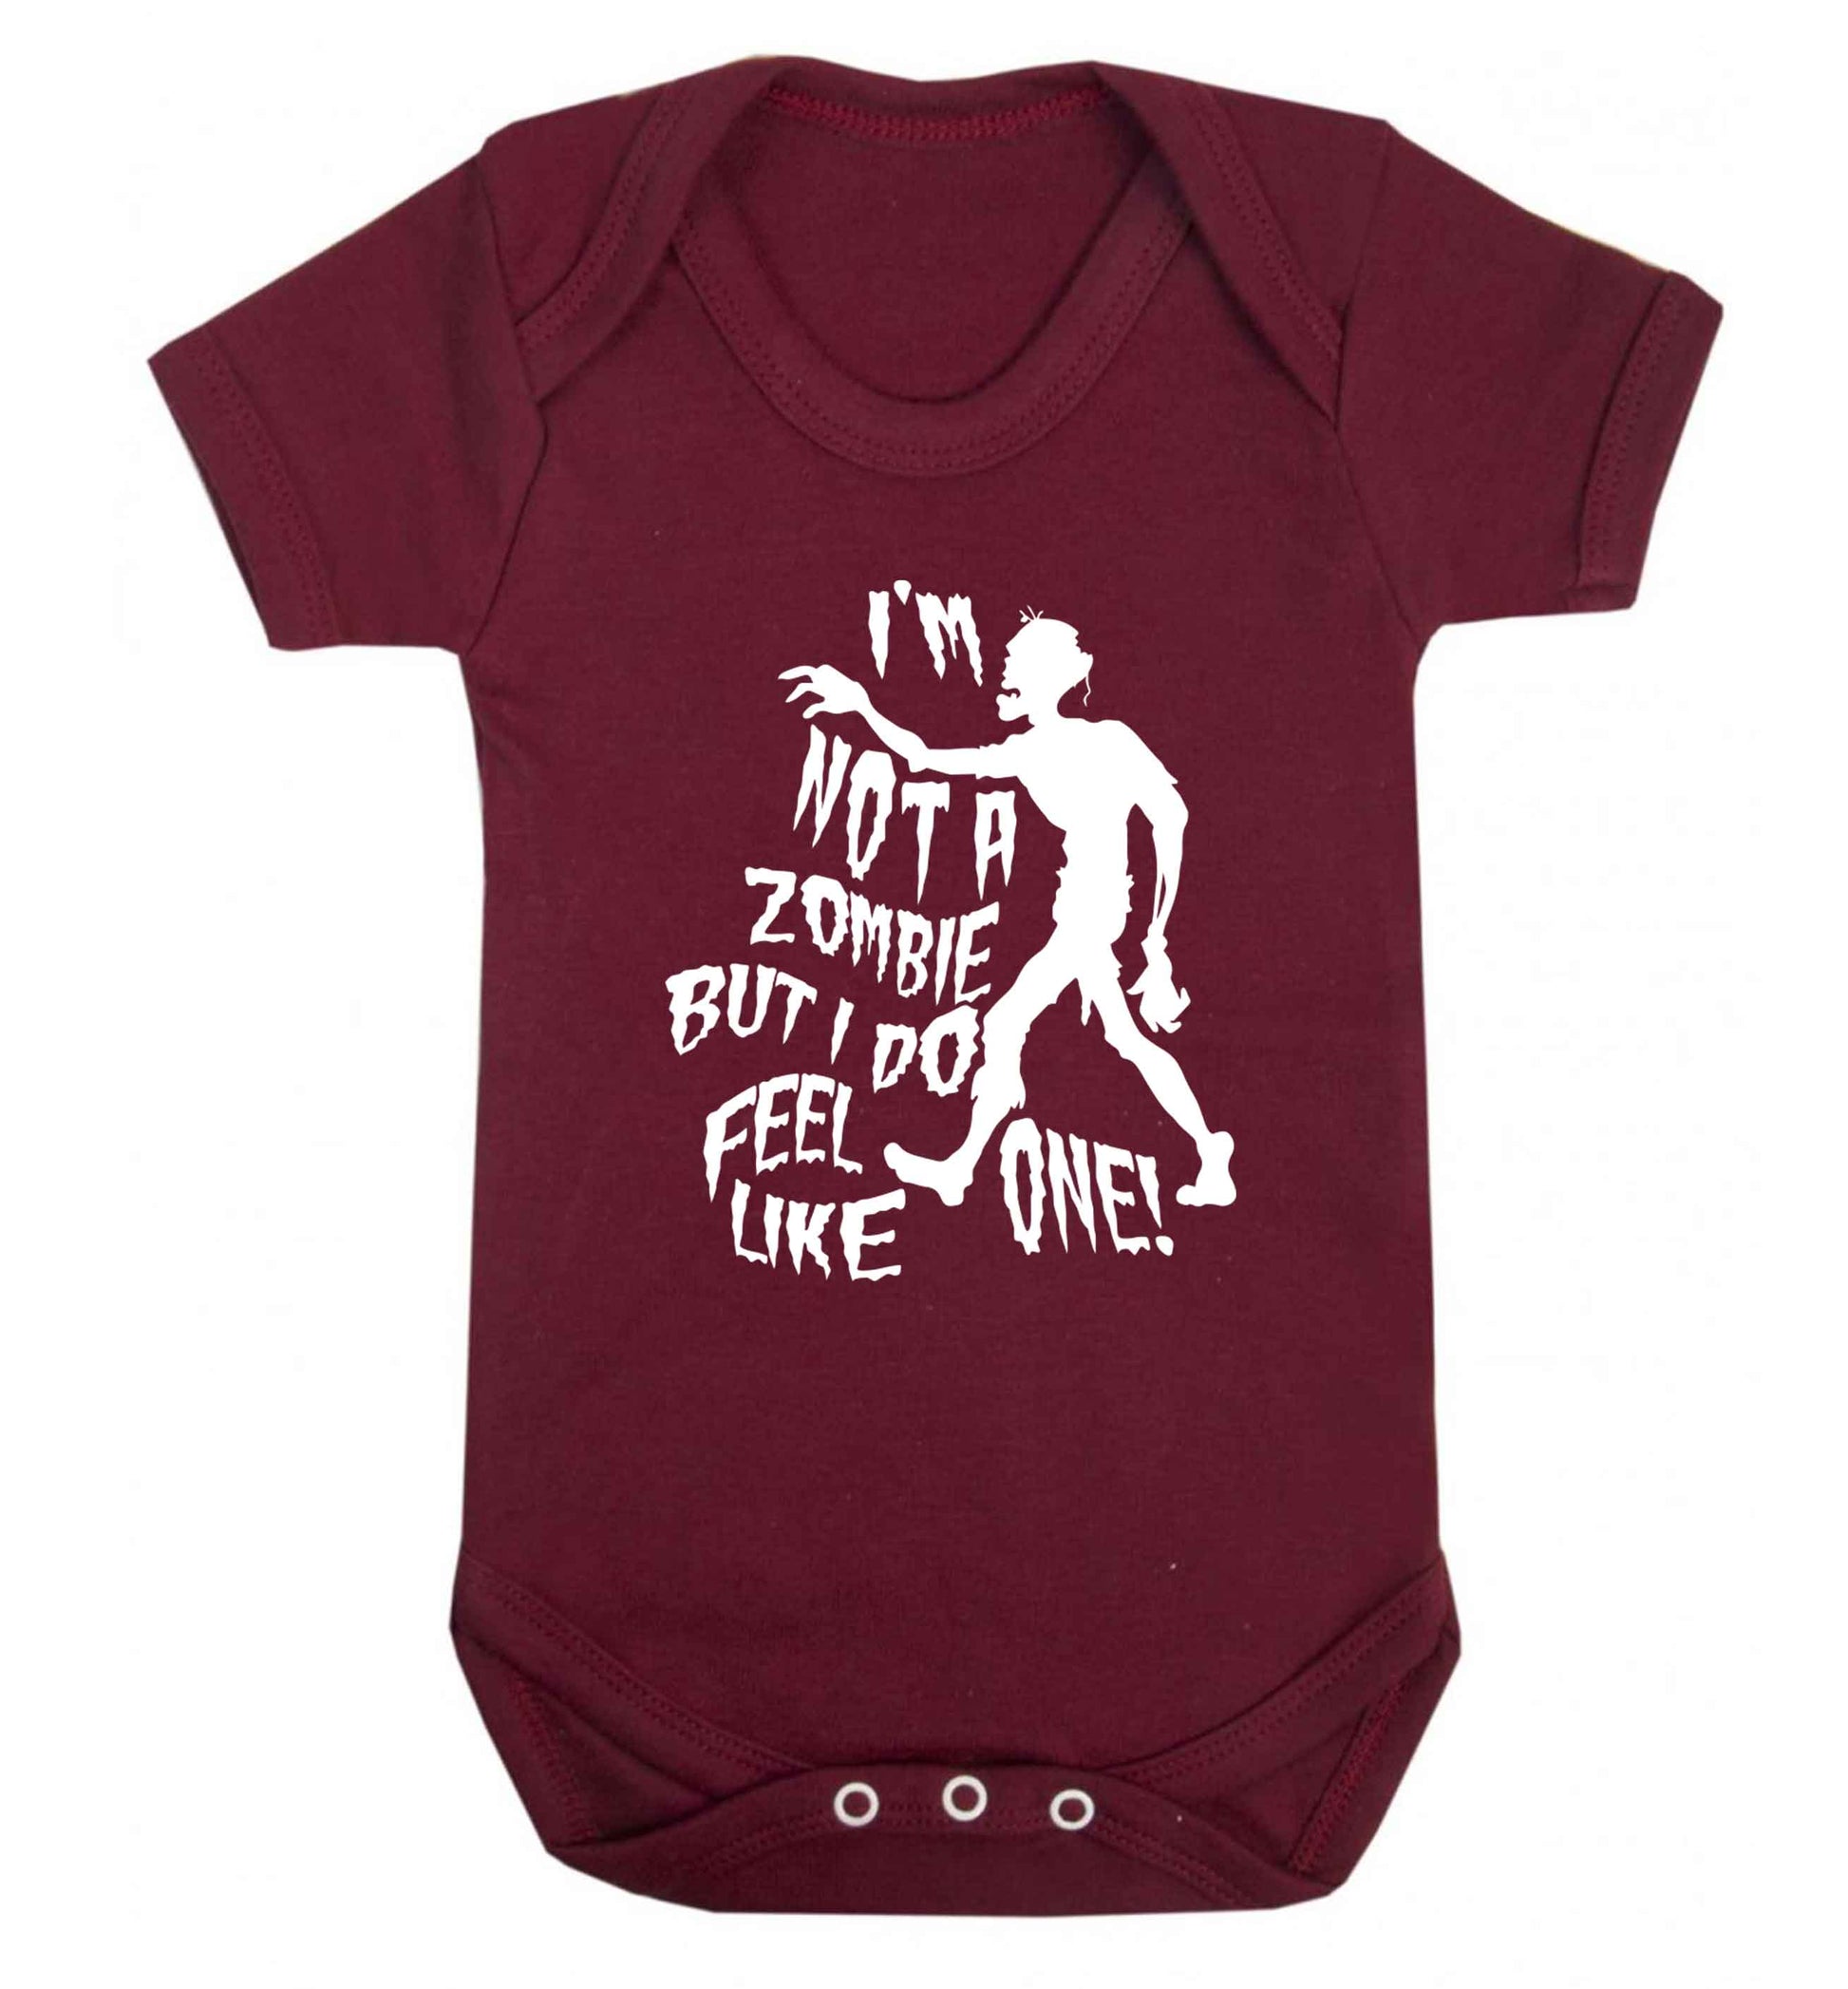 I'm not a zombie but I do feel like one! Baby Vest maroon 18-24 months